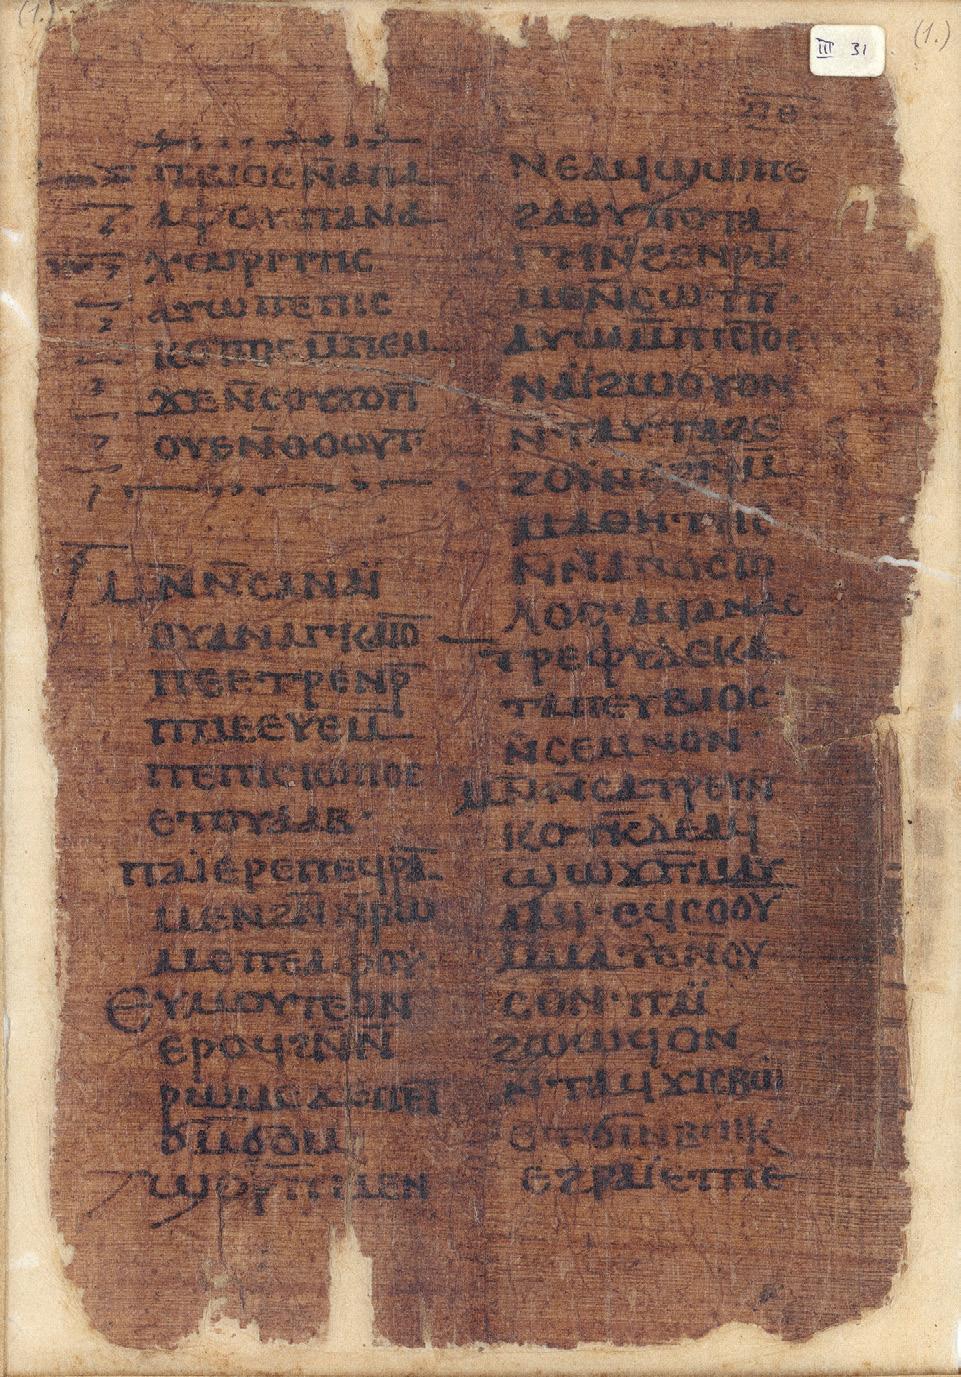 of Alexandria, De Nativitate), a few pseudepigraphal works that is new works attributed to old or false authors and a selection of normative works, such as the Gnomai Concilii Nicaeni.